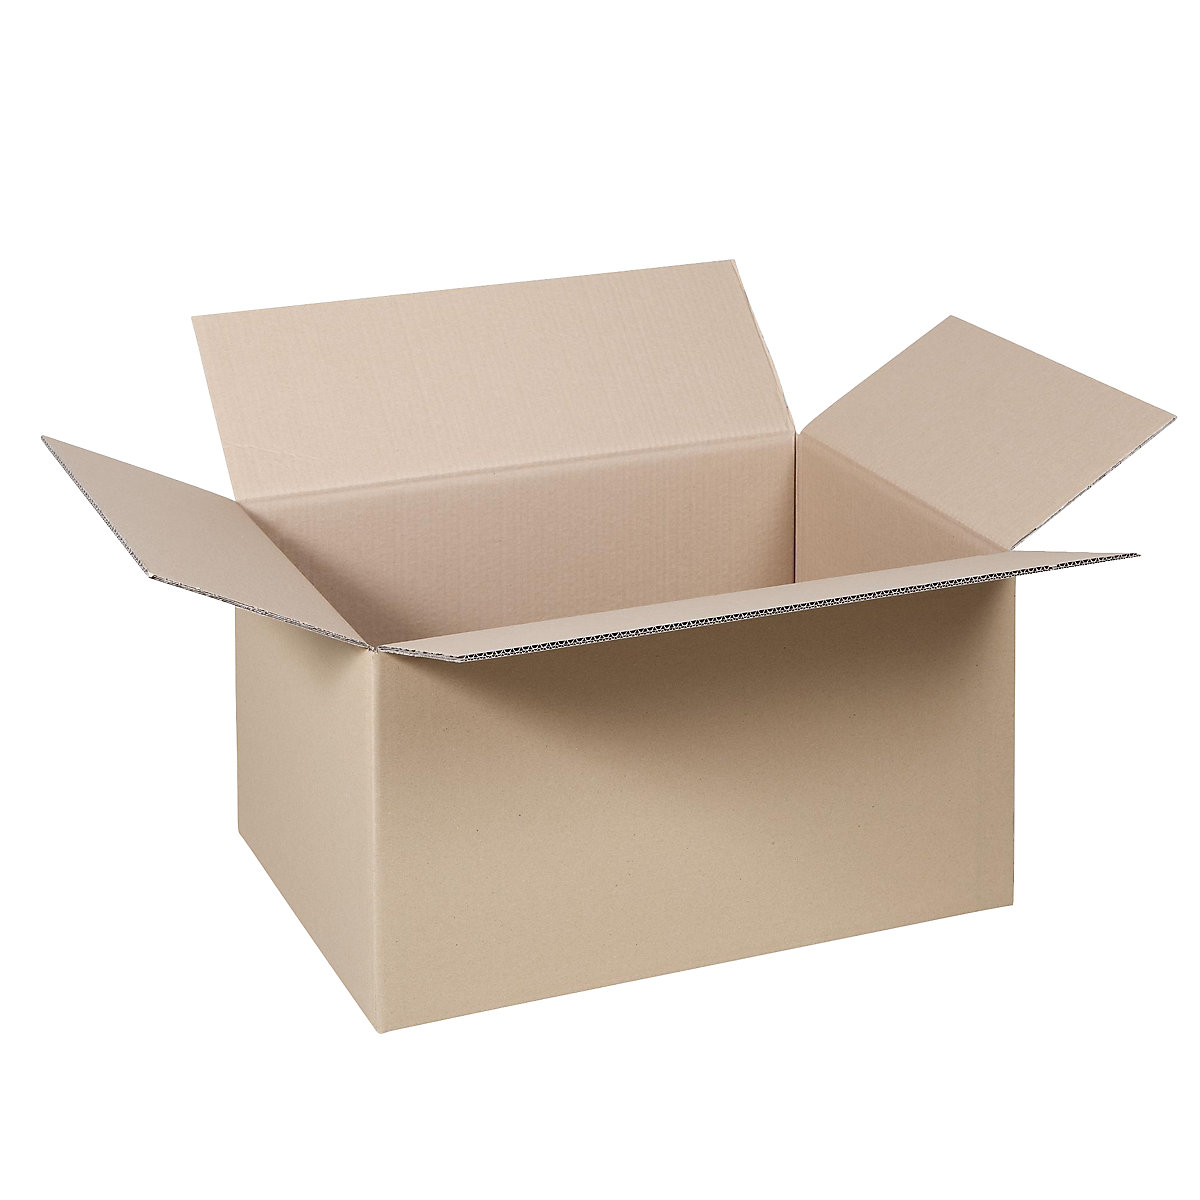 Folding cardboard box, FEFCO 0201, made of double fluted cardboard, internal dimensions 300 x 200 x 170 mm, pack of 50-25